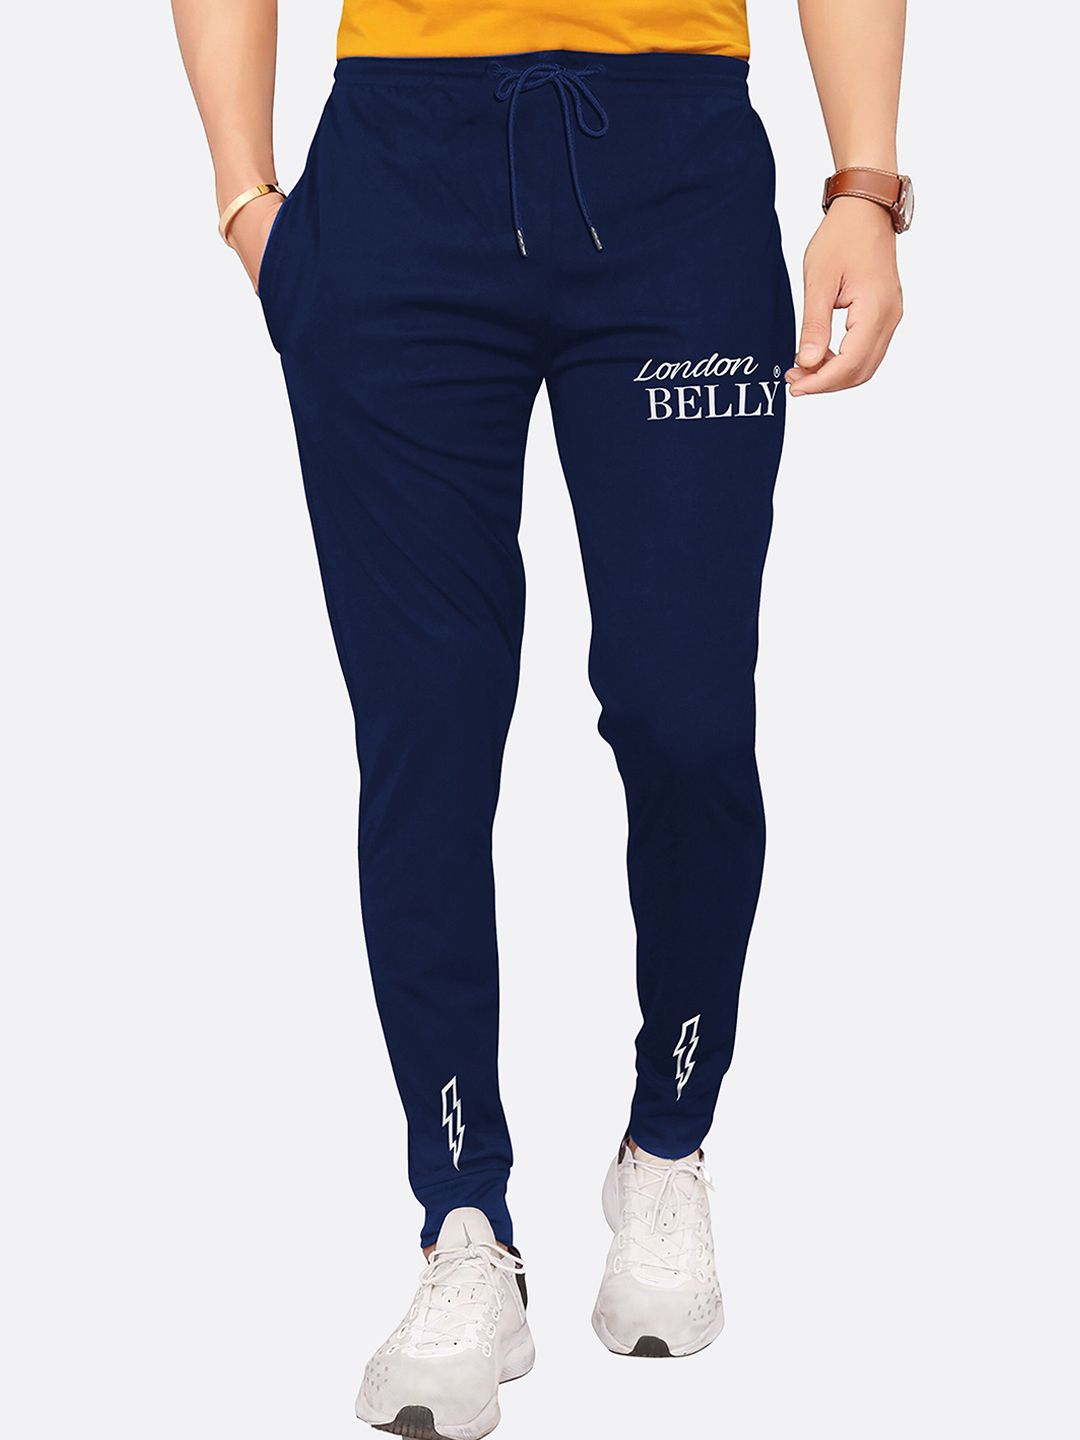 LONDON BELLY Women Navy Blue Solid Track Pants Price in India